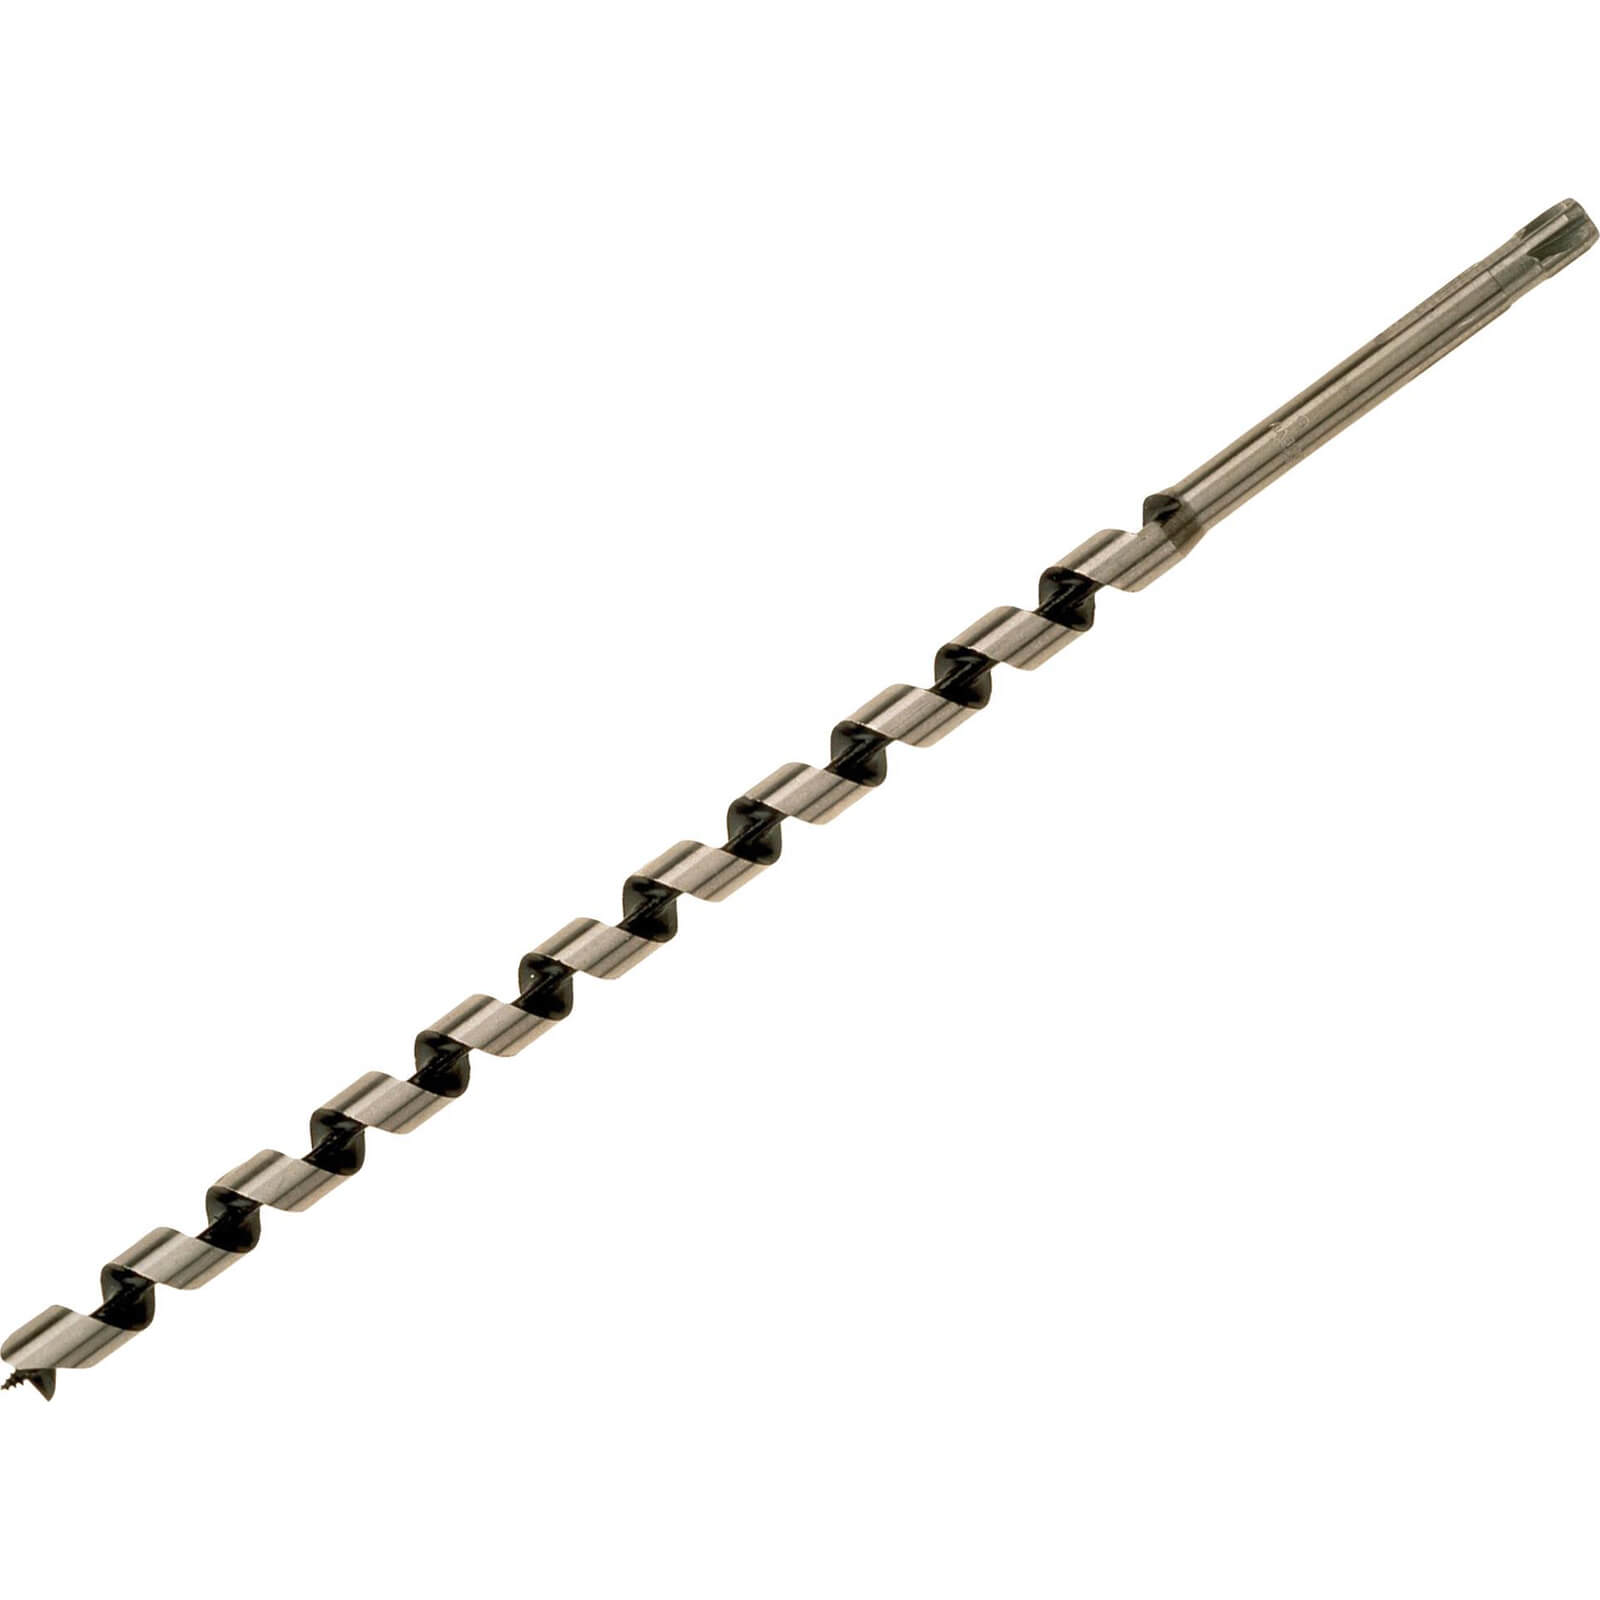 Photo of Bahco 9627 Series Long Combination Auger Drill Bit 26mm 460mm